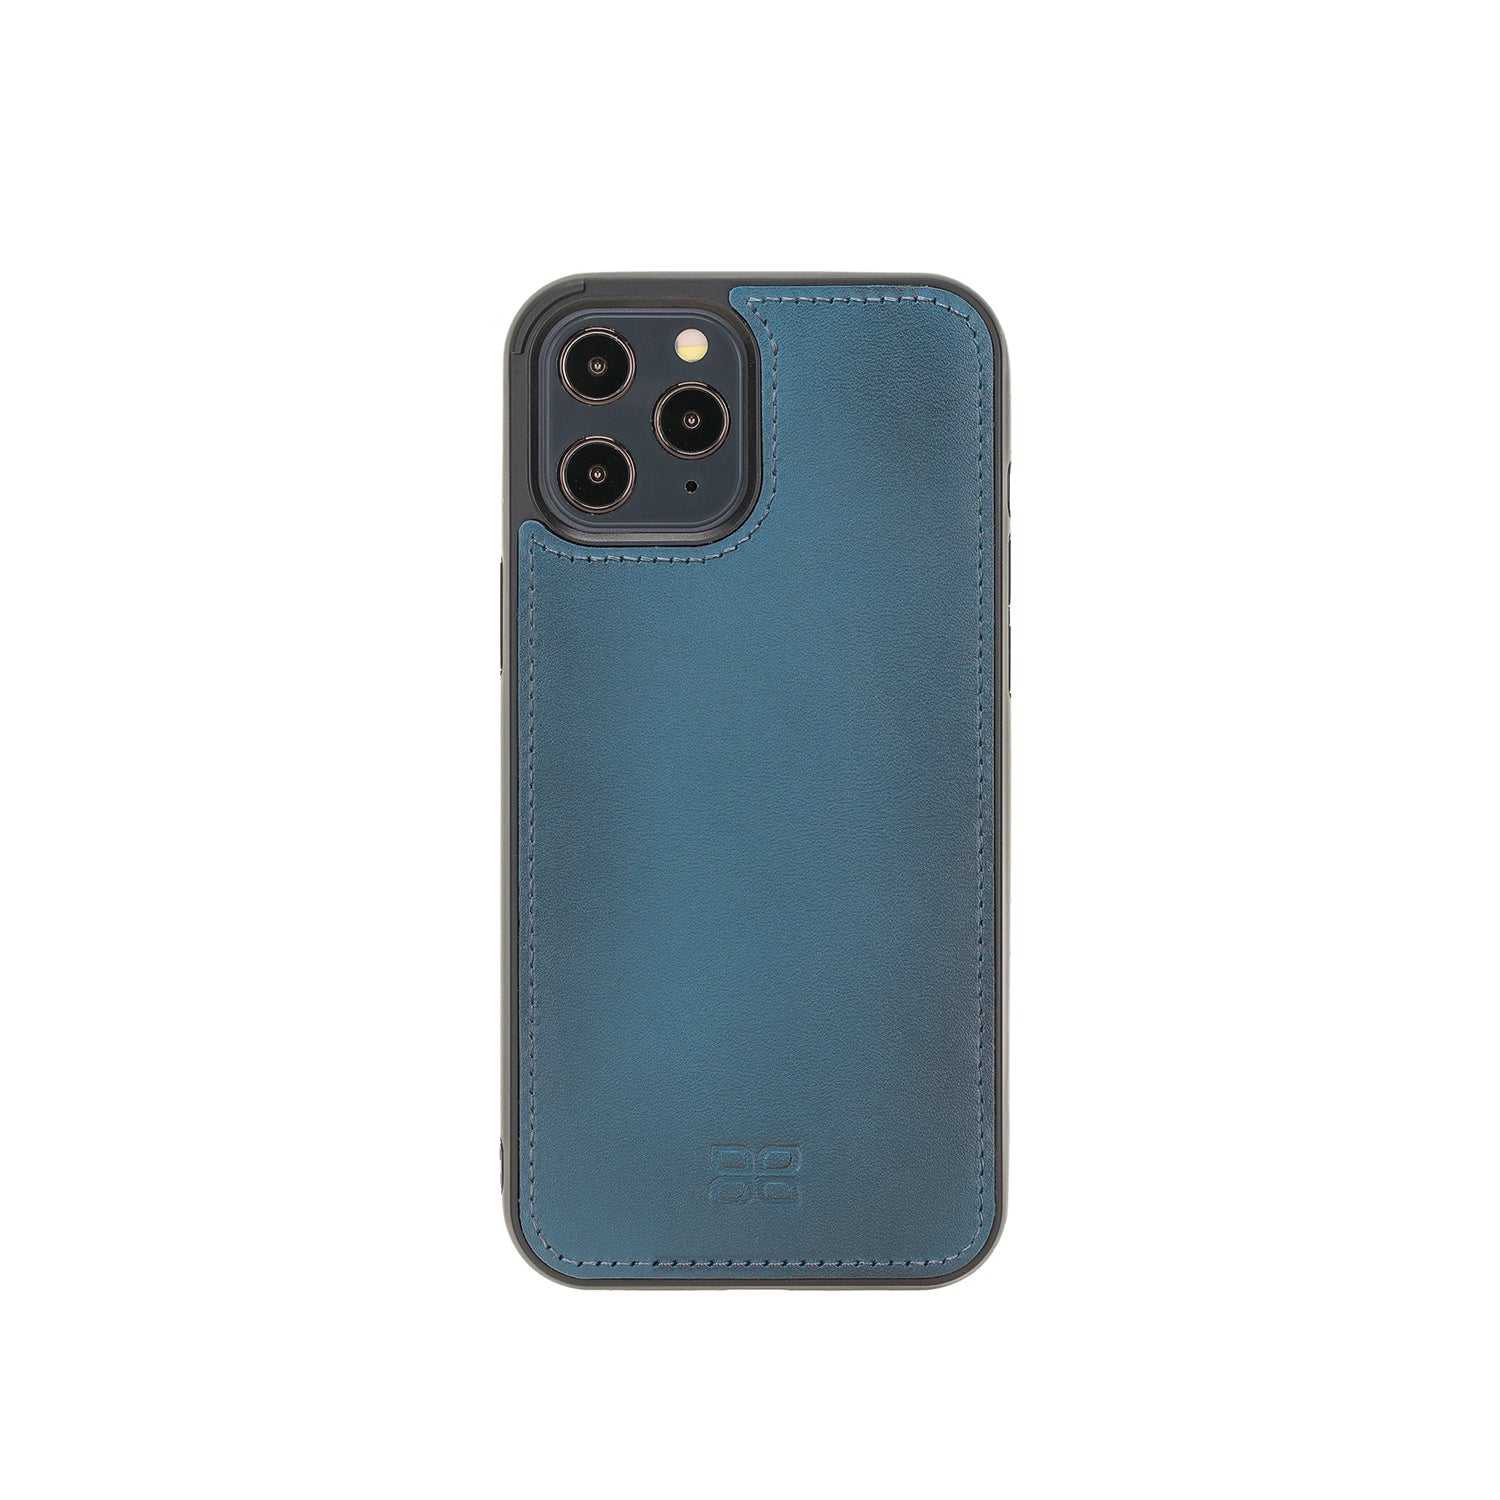 Flex Cover Leather Back Case for iPhone 12 Pro Max (6.7") - BLUE - saracleather